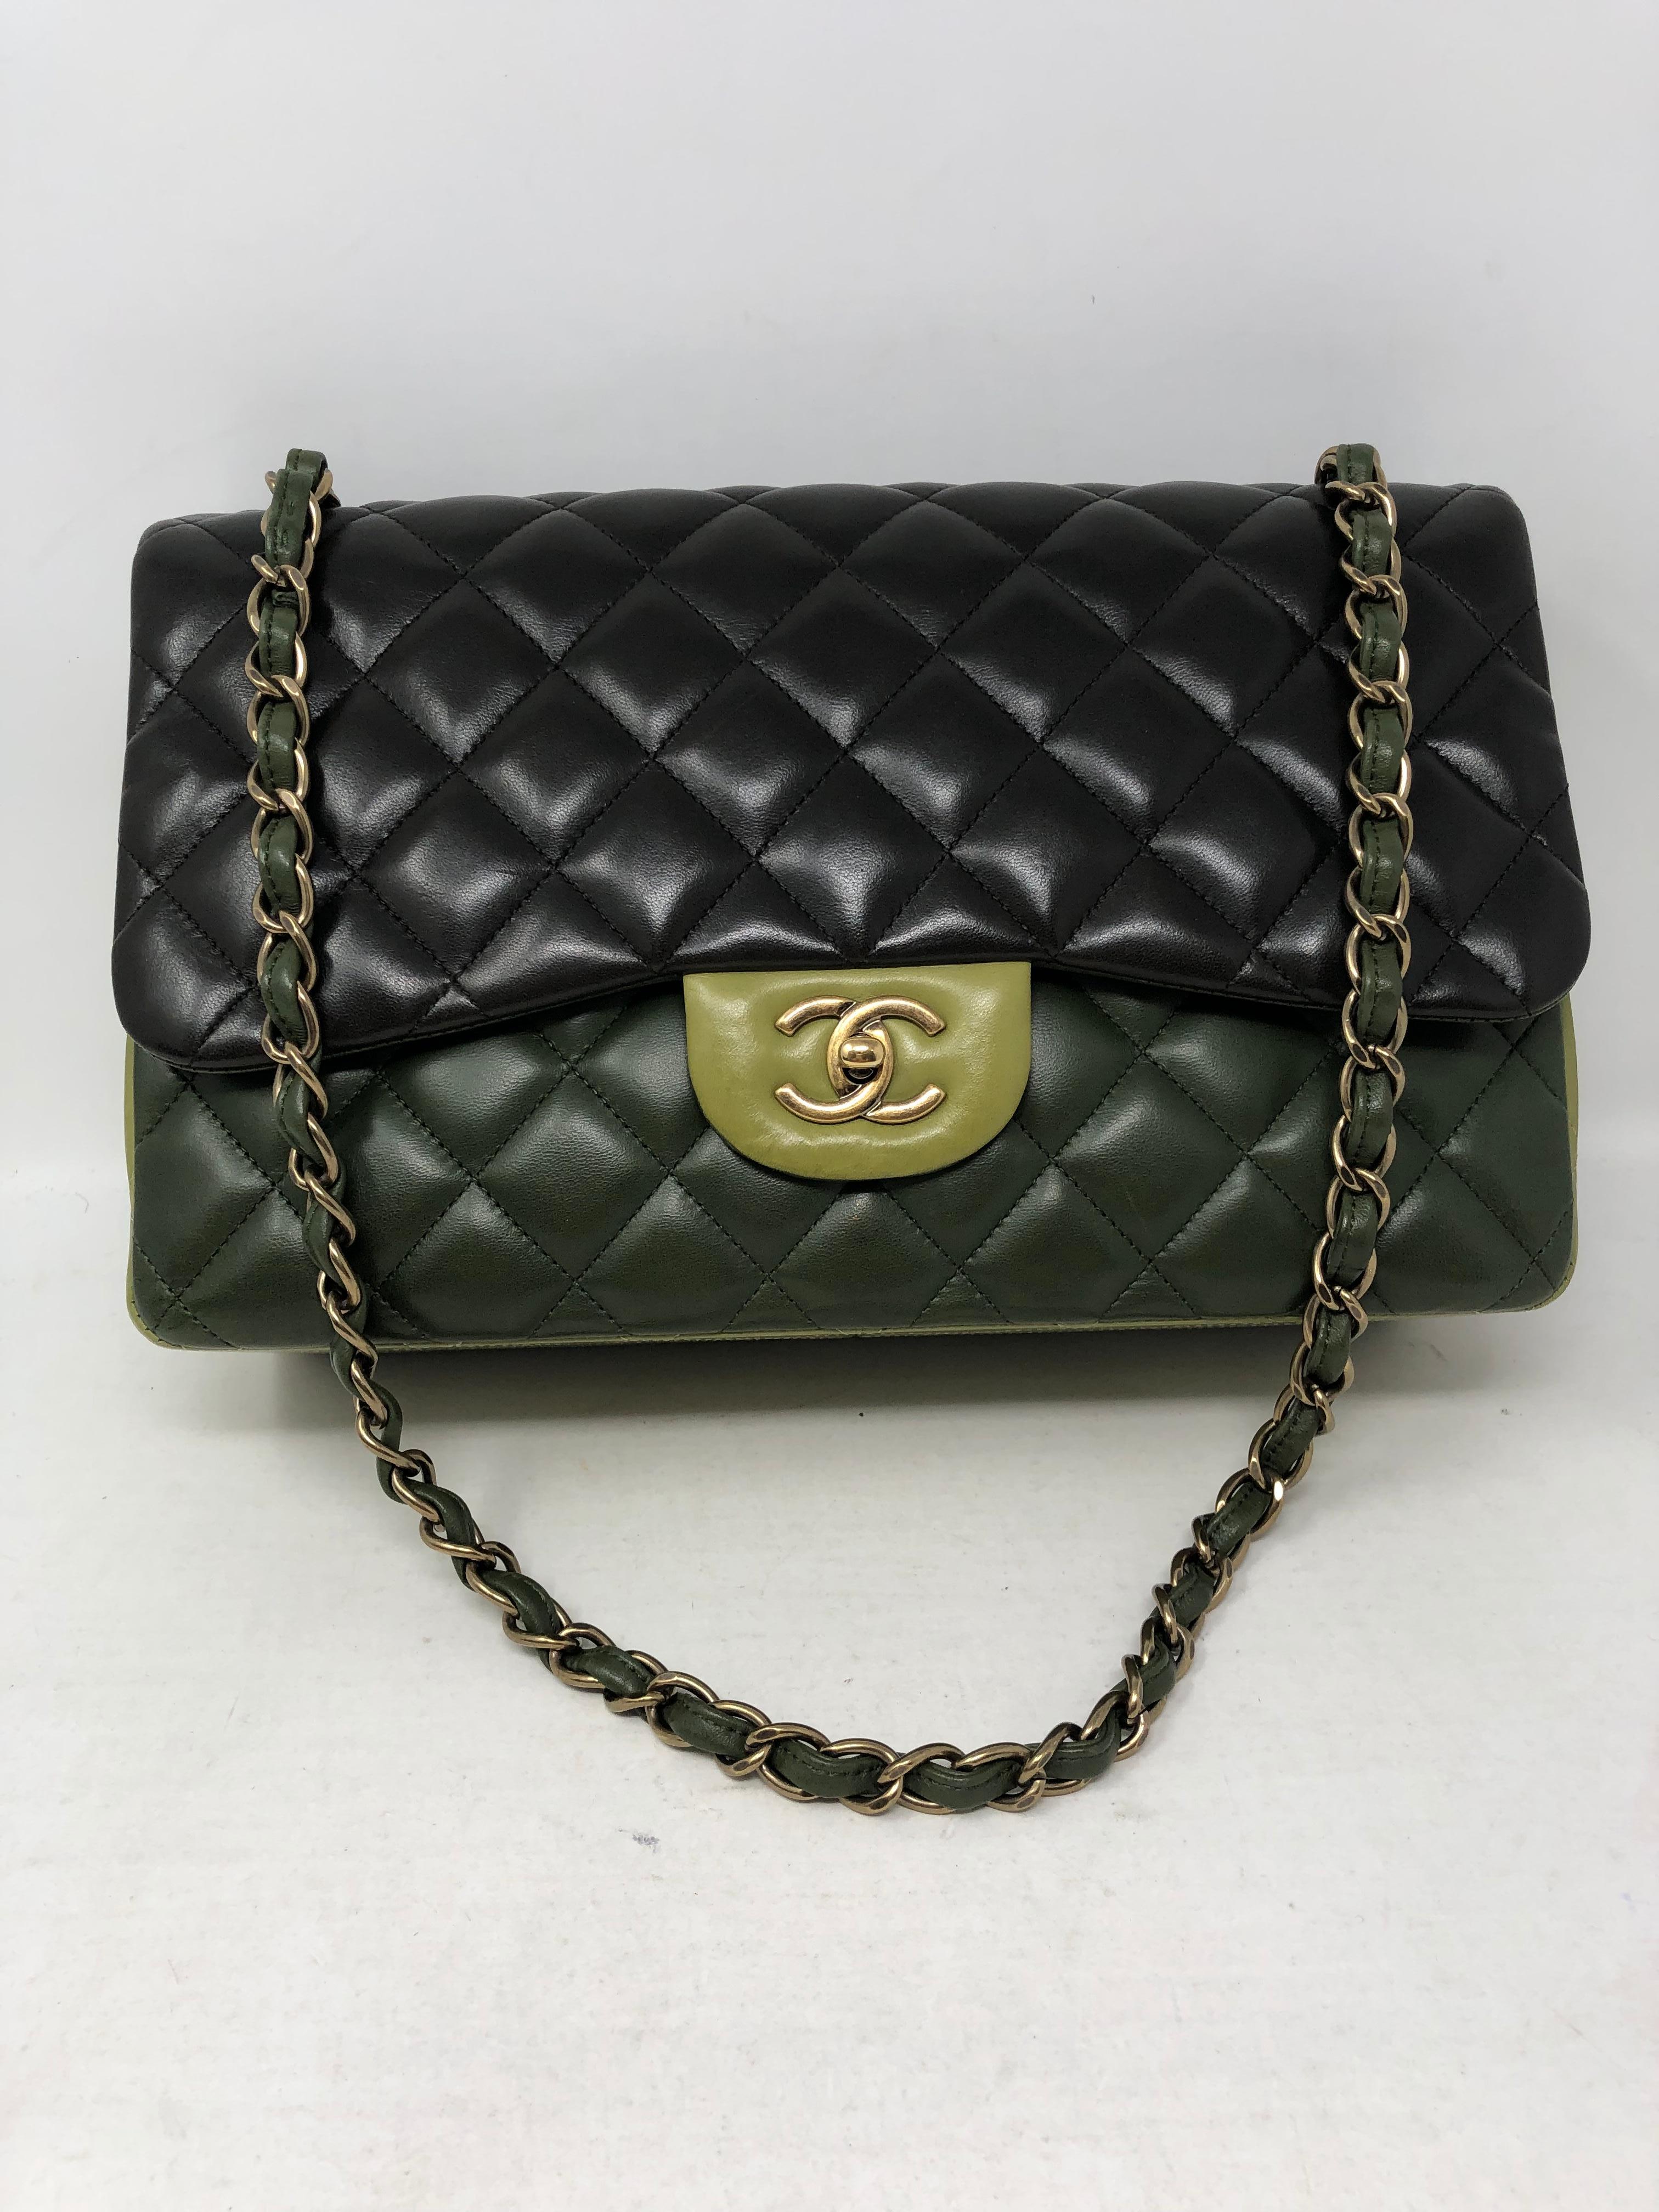 Chanel Multicolor Double Flap Bag. Avocado green colors in 3 different shades. Most wanted bag. Excellent condition. Matte Gold hardware. Ready to be worn. Includes authenticity card. Guaranteed authentic.  